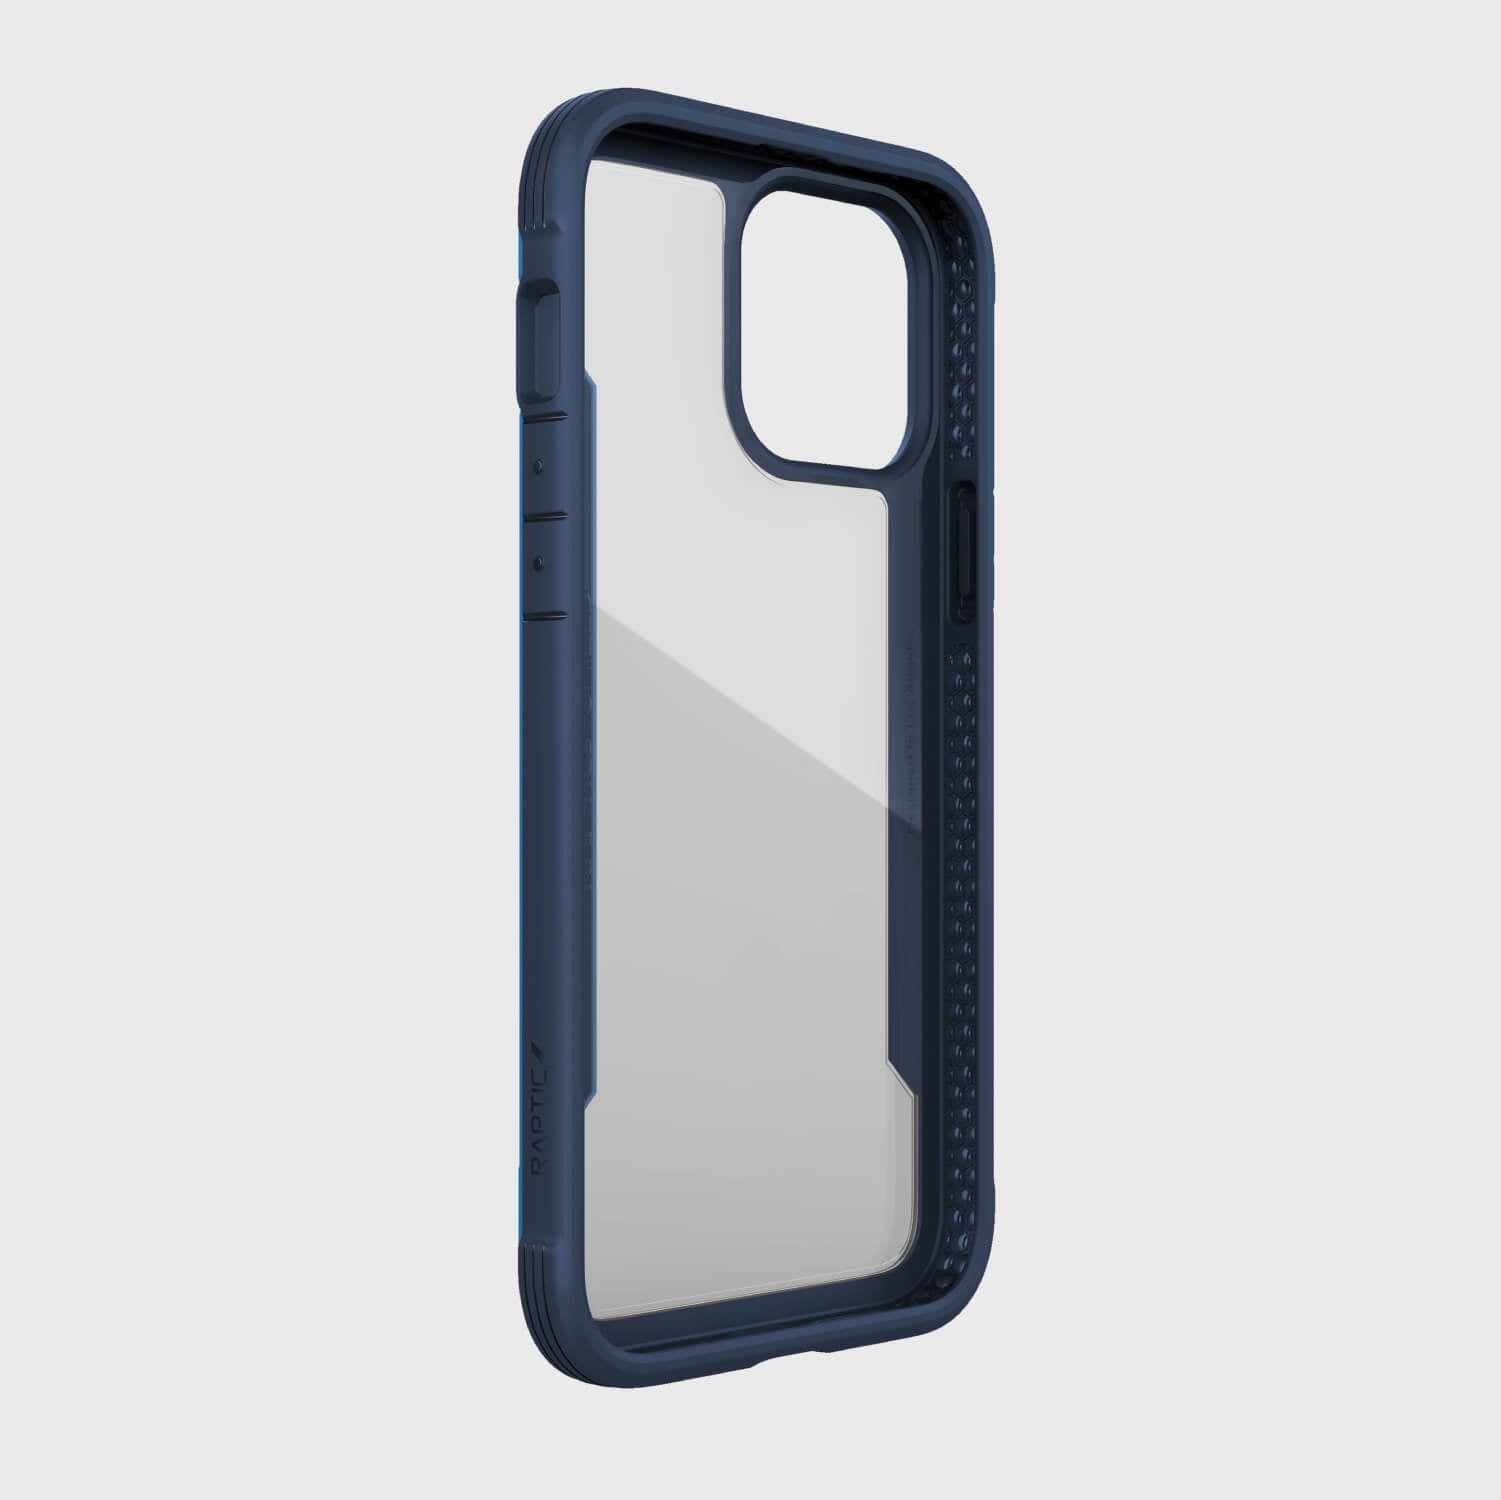 Blue Raptic iPhone 13 Pro Max case with drop protection.